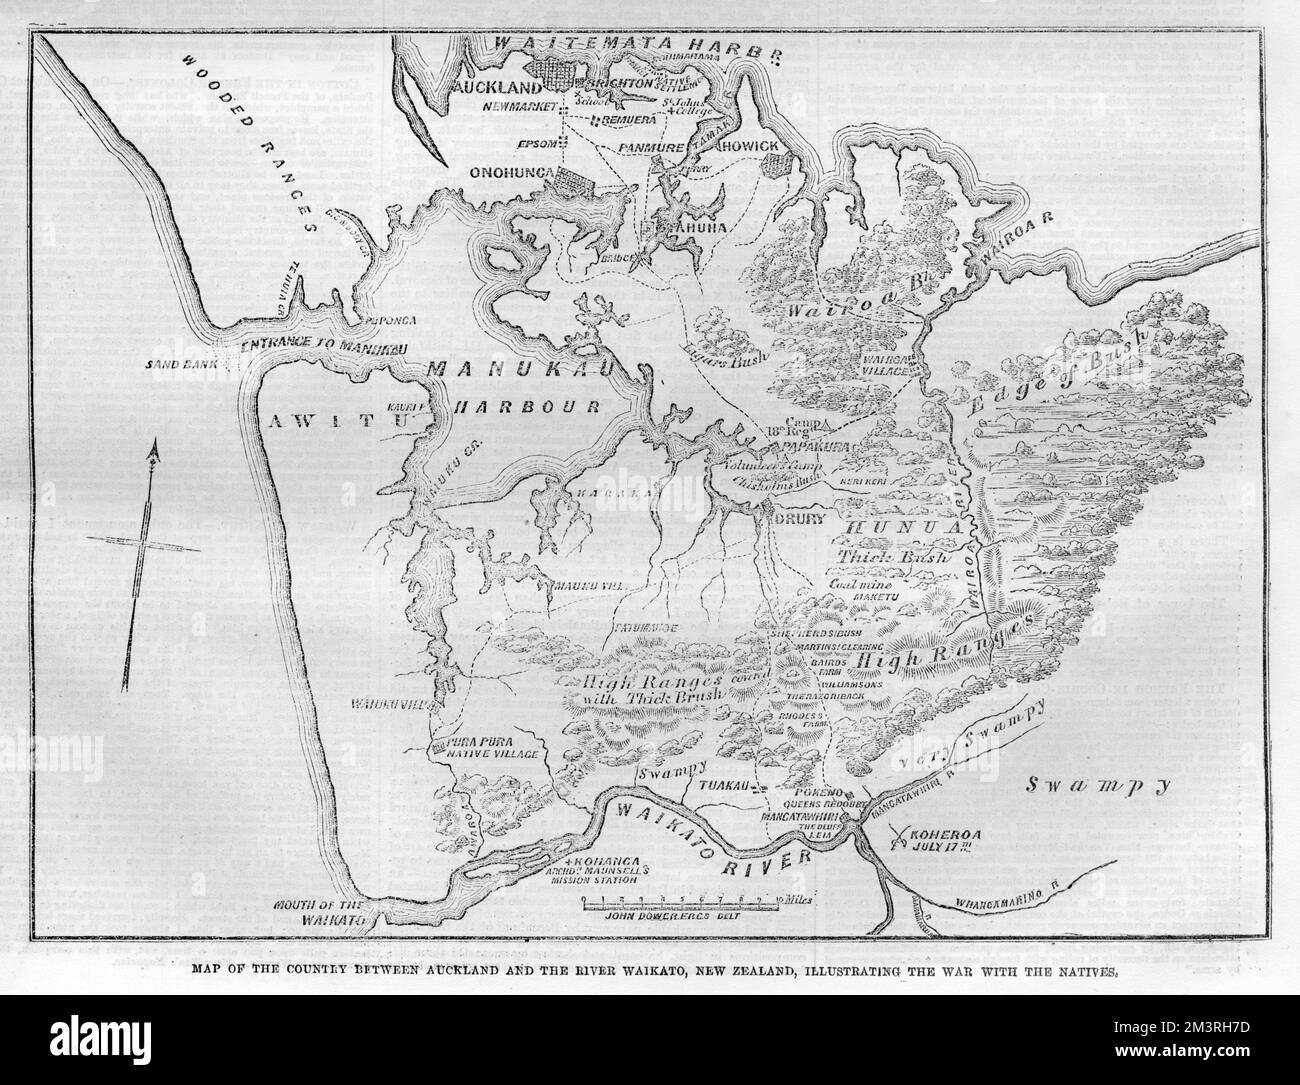 Map of the country between Auckland and the River Waikato, New Zealand, illustrating the war with the native Maori tribes.     Date: 1863 Stock Photo